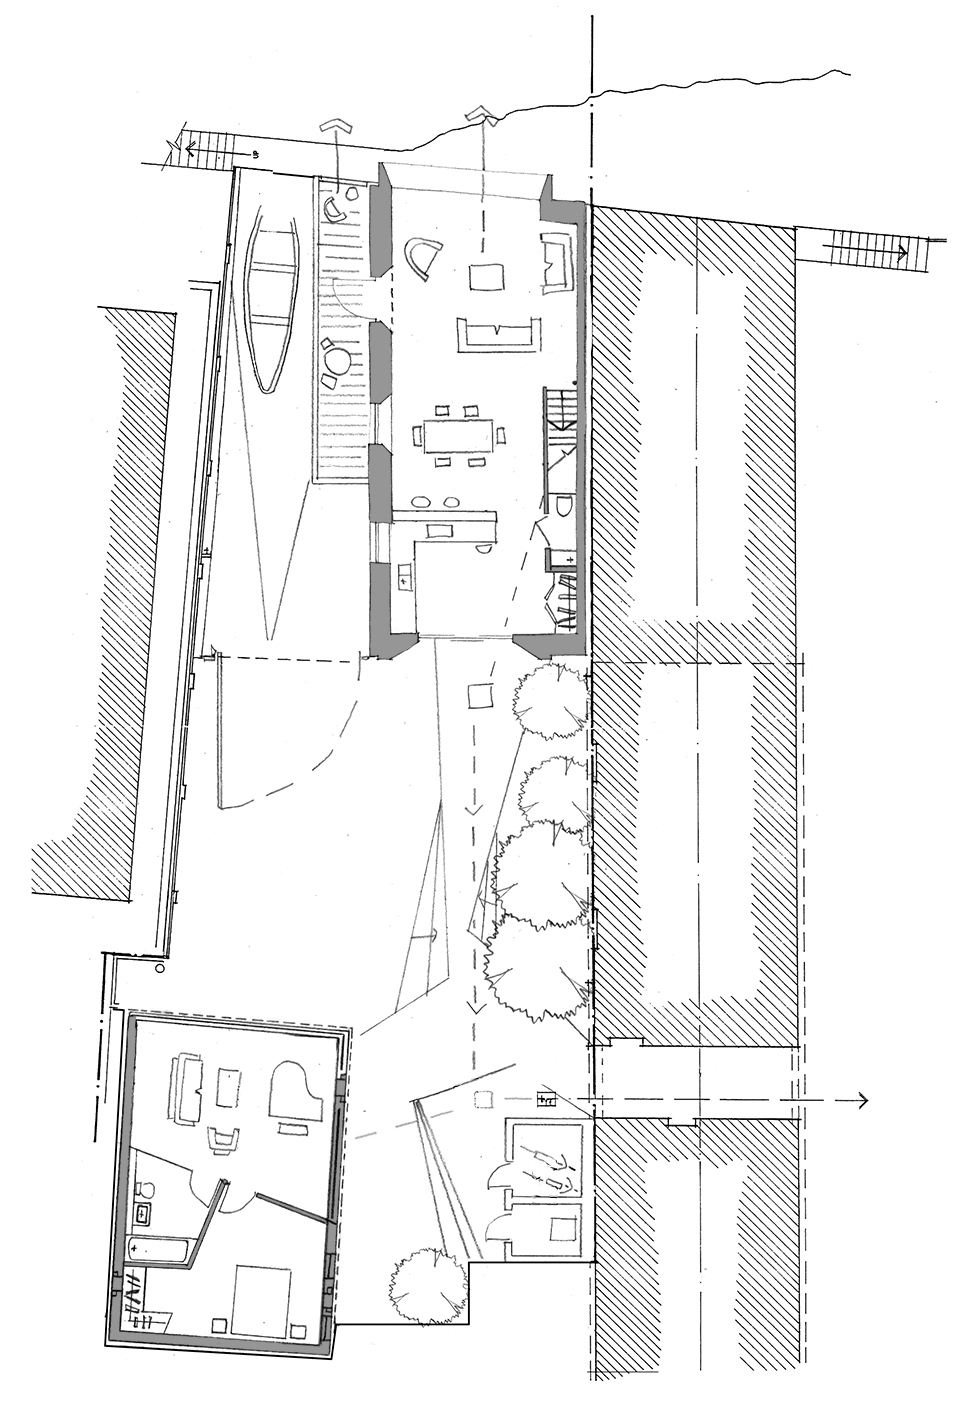 Cottles Quay Amphibious Staycation Ground Floor Plan